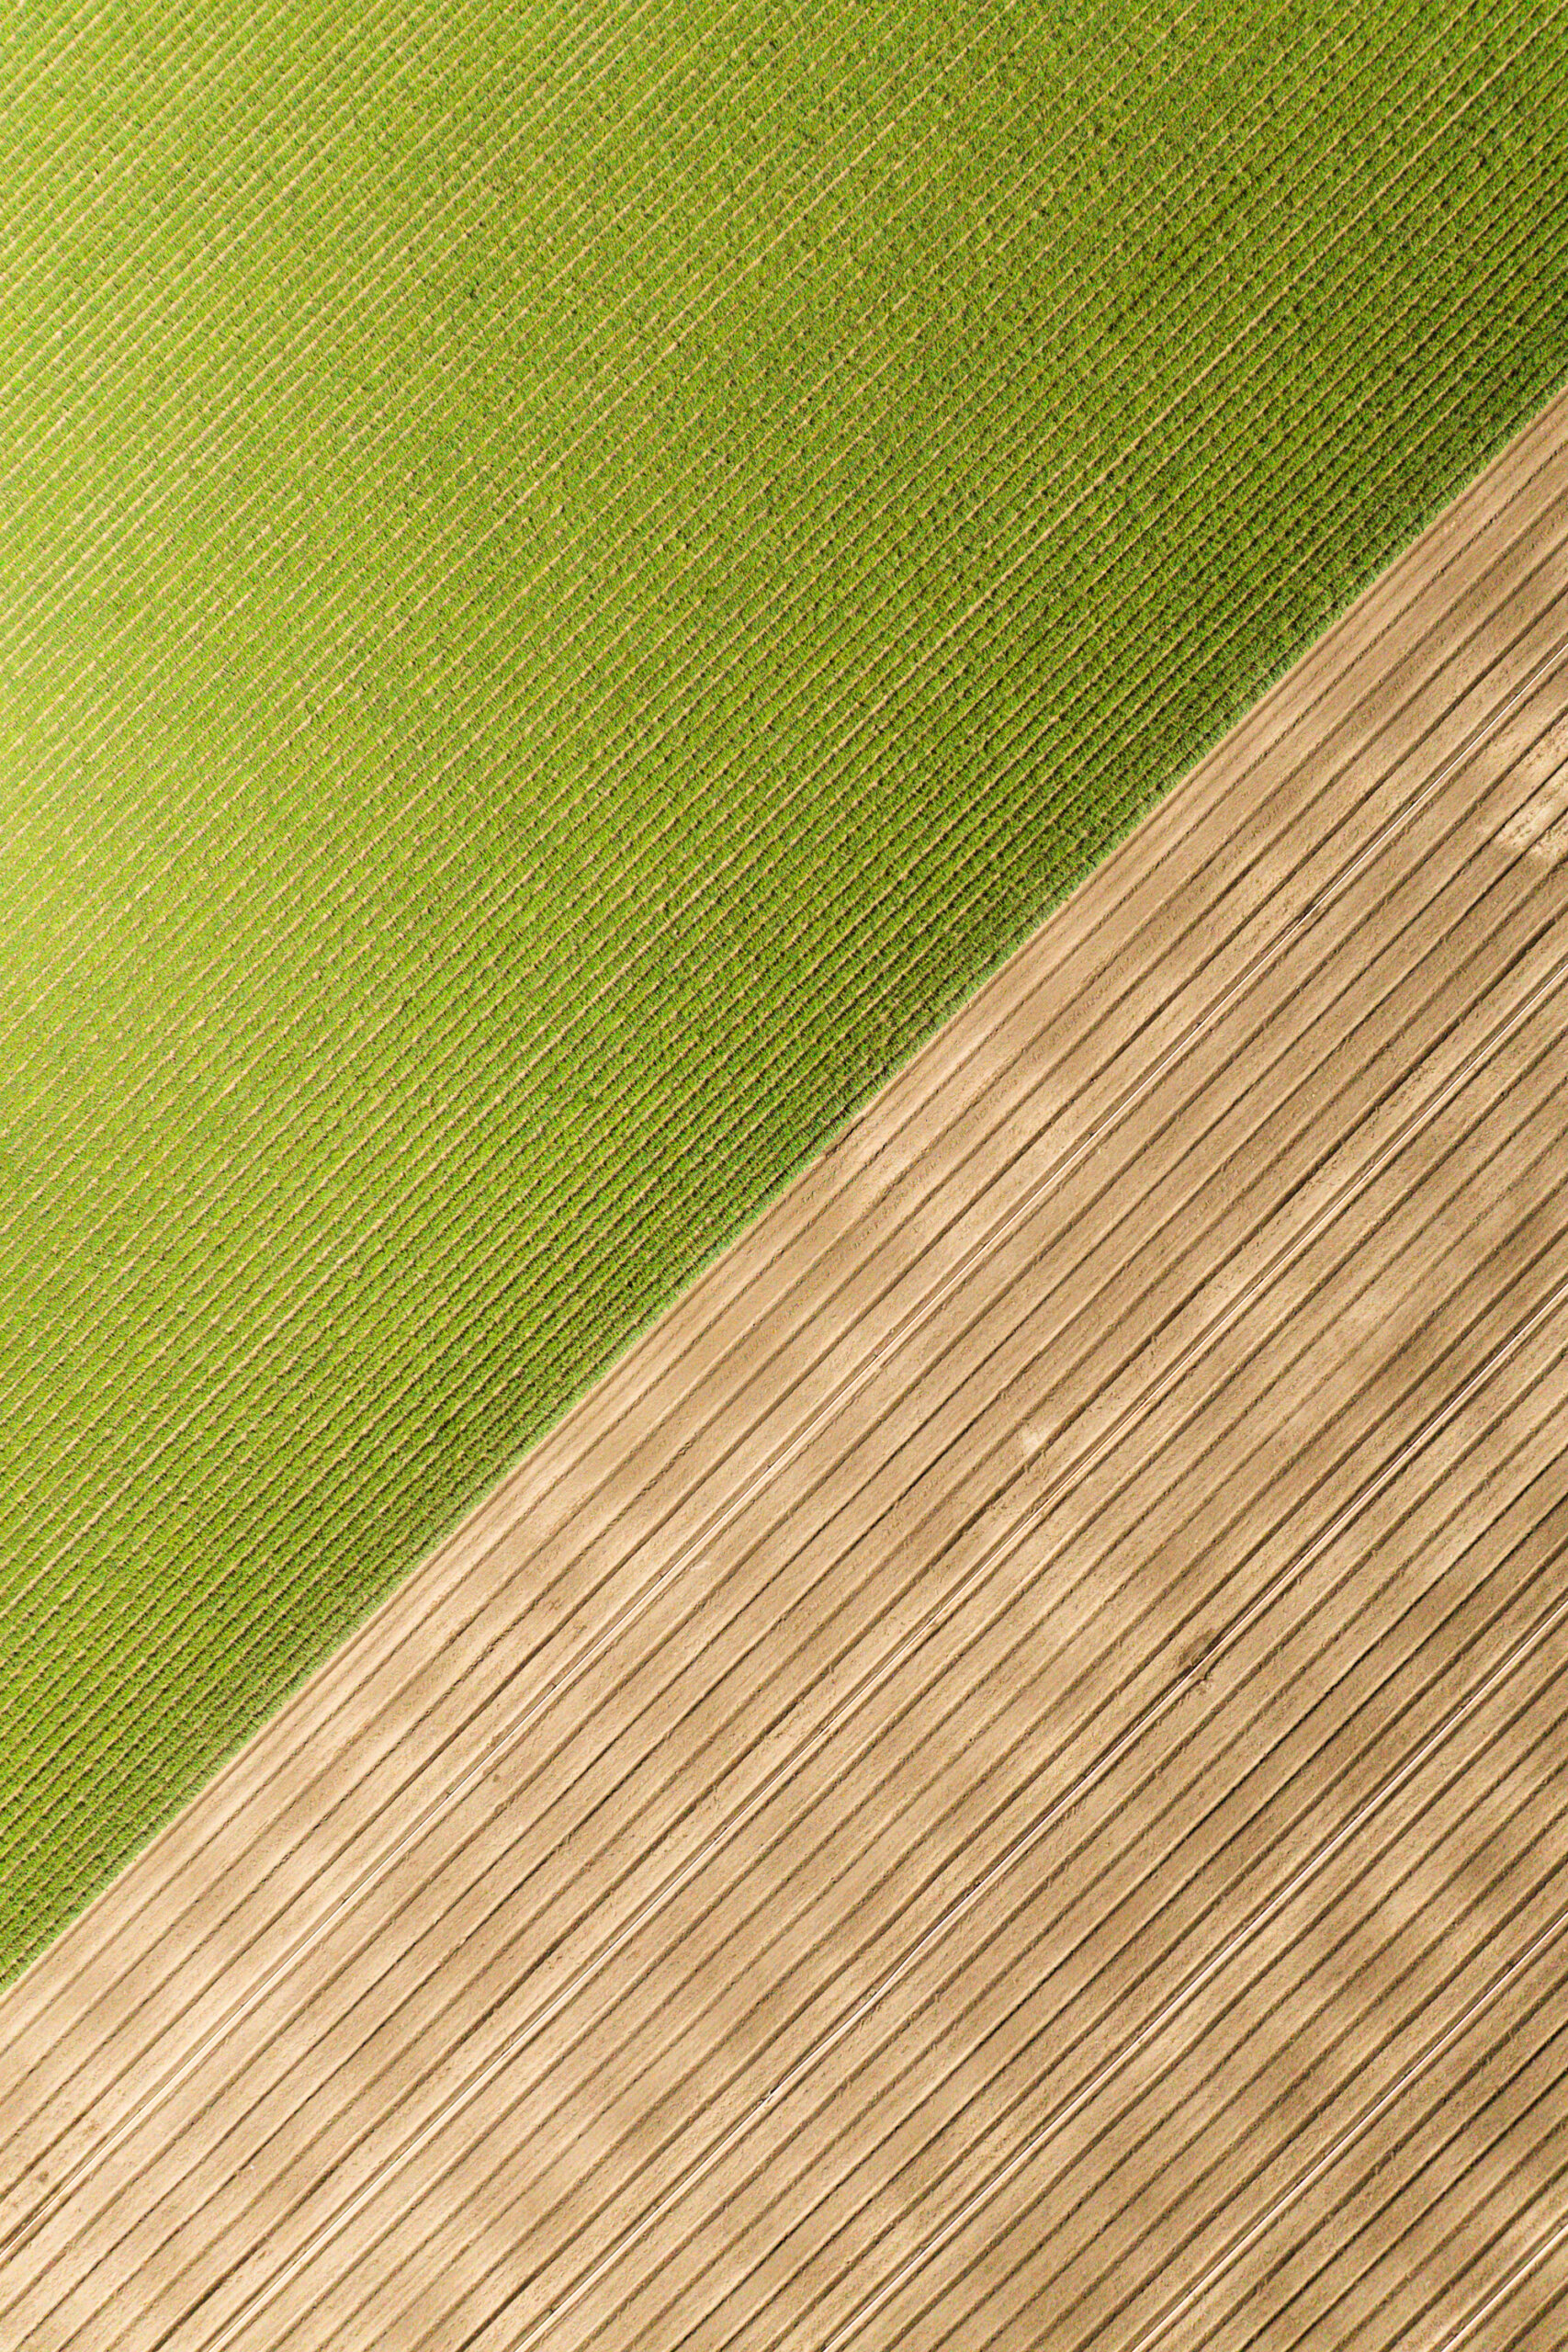 Aerial view of the textures created by rows of garlic and tilled soil